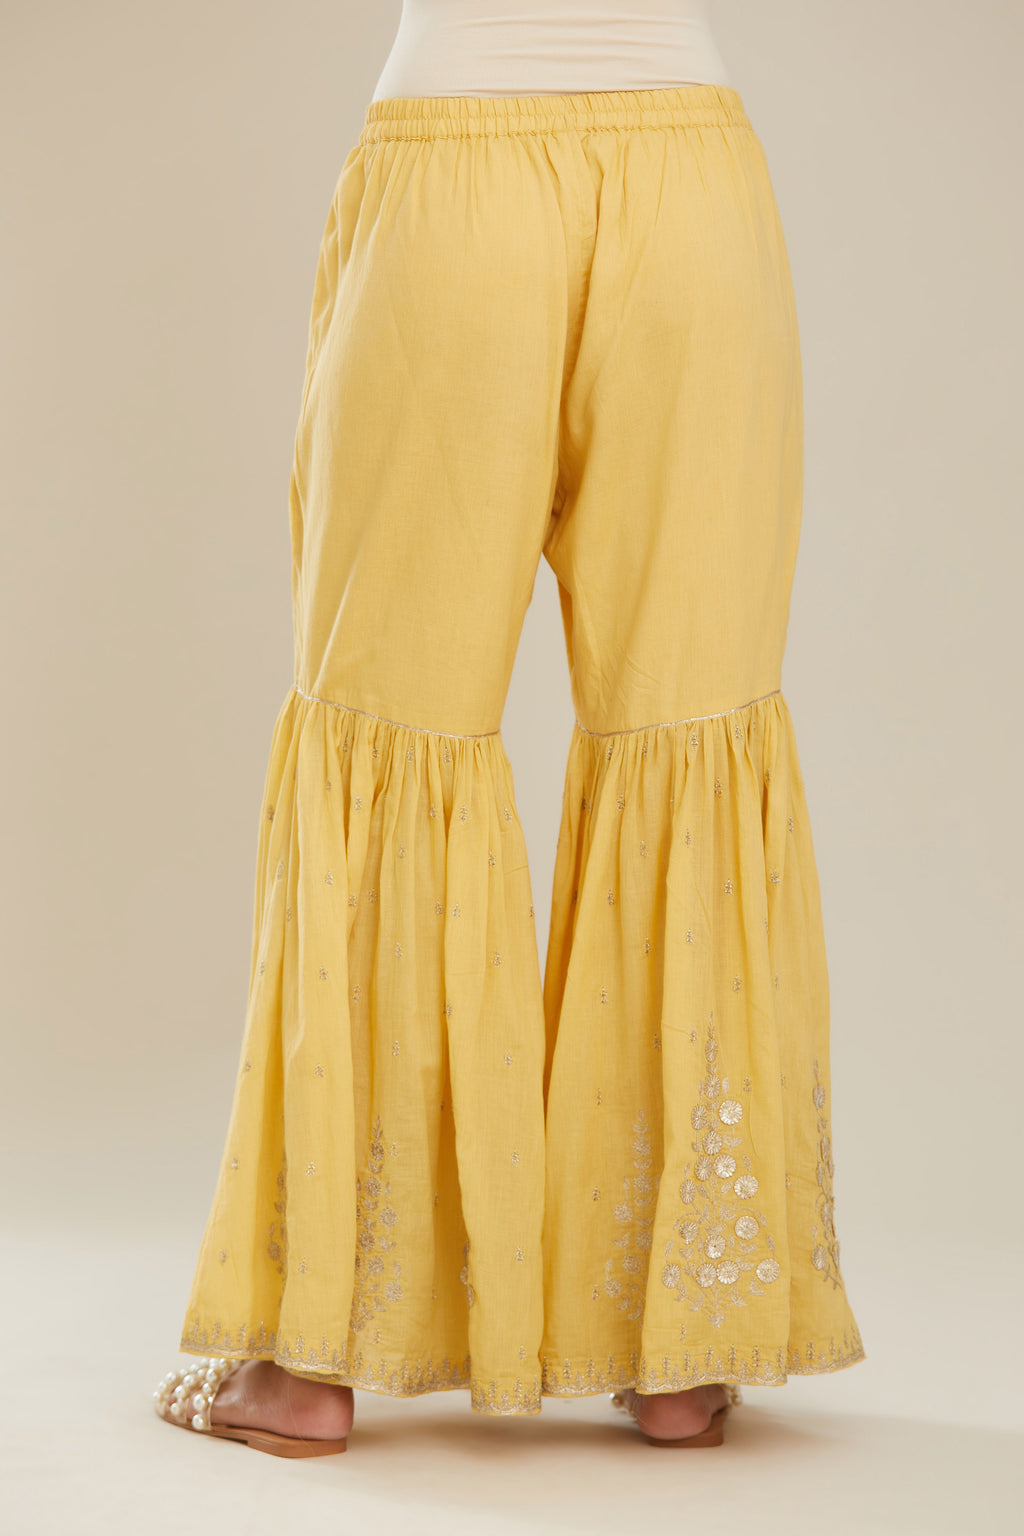 Yellow farshi with gold zari and gota embroidery and gota detailing at knee joint seam. (Farshi)